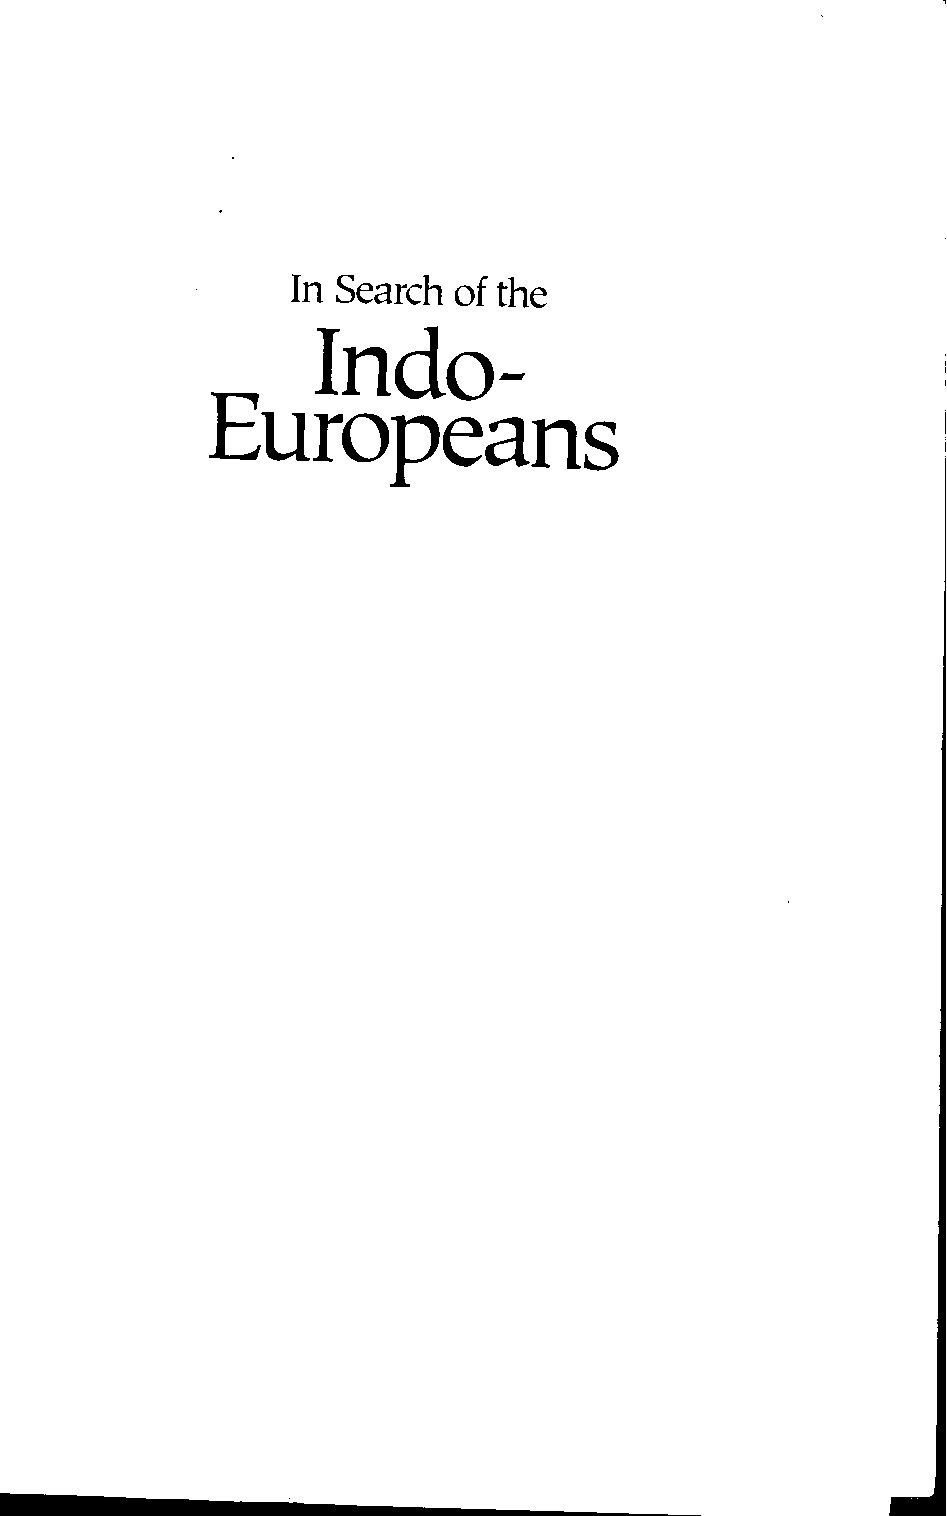 J. P. Mallory - In Search of the Indo-Europeans; Language, Archaeology and Myth